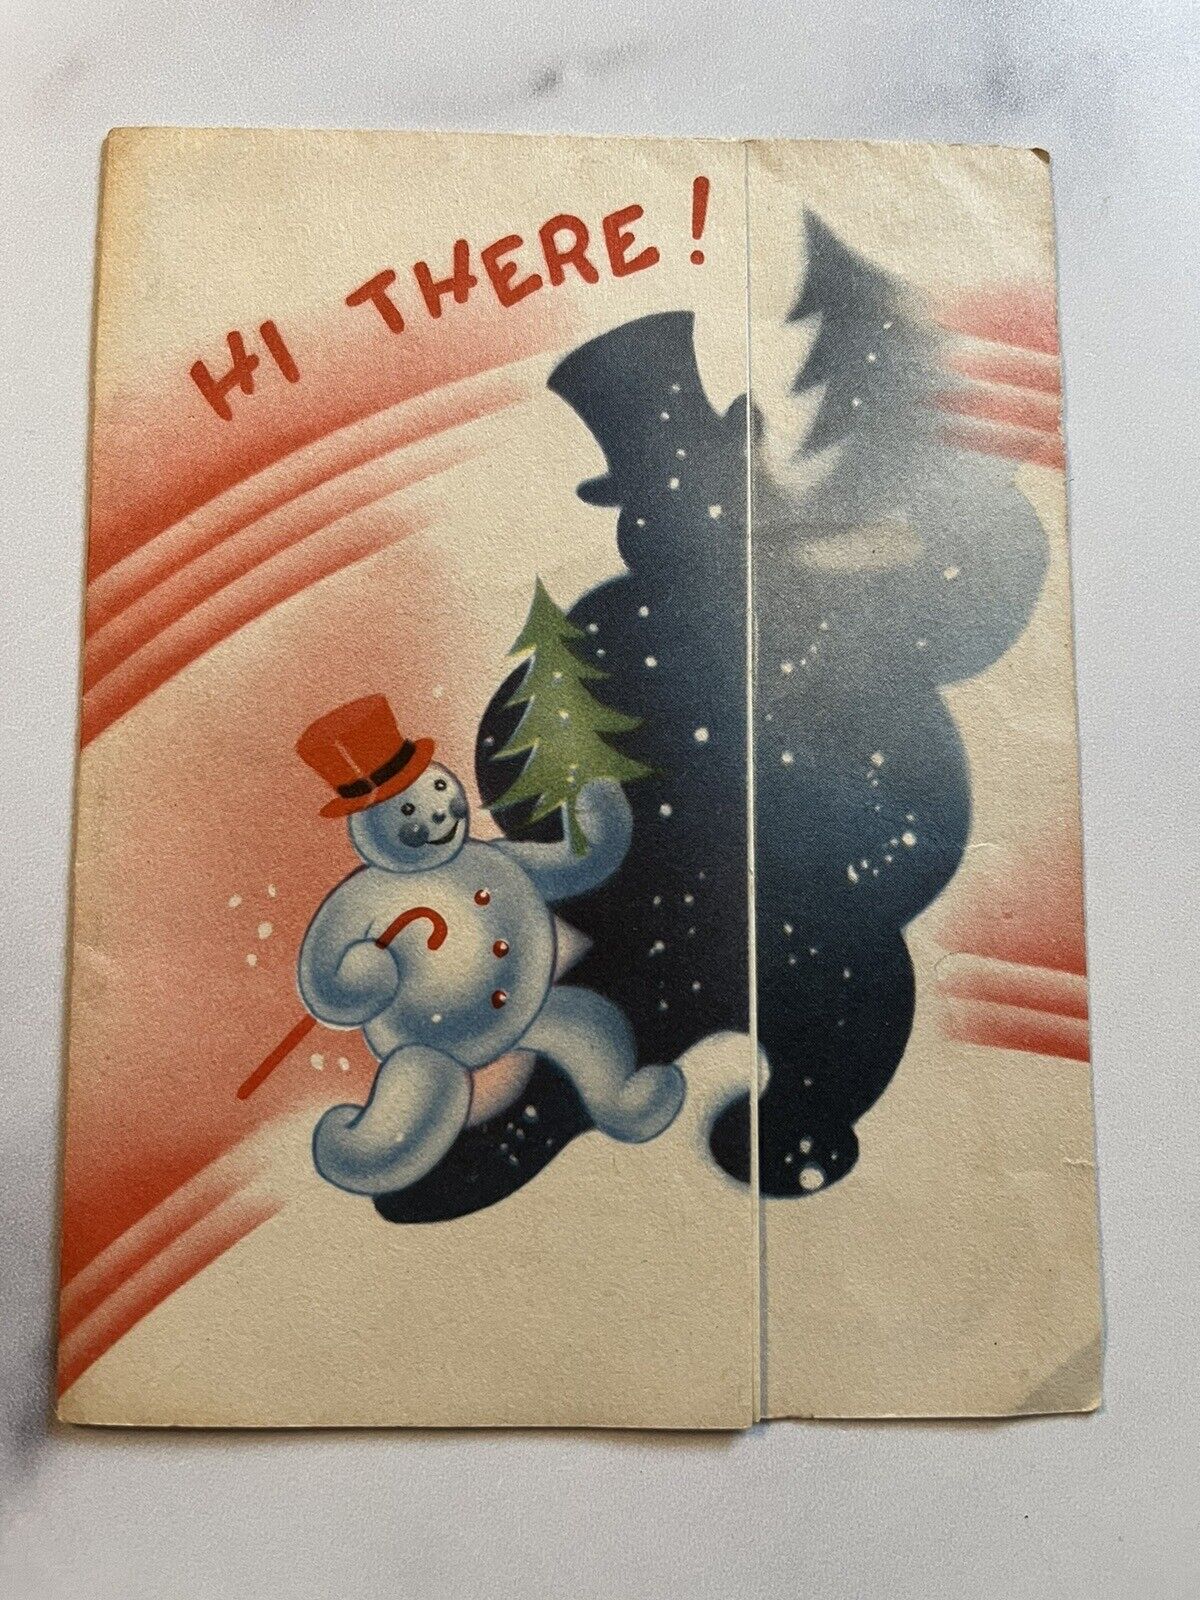 Vintage Christmas Greeting Card Frosty The Snowman Quality 2110 B Made In USA